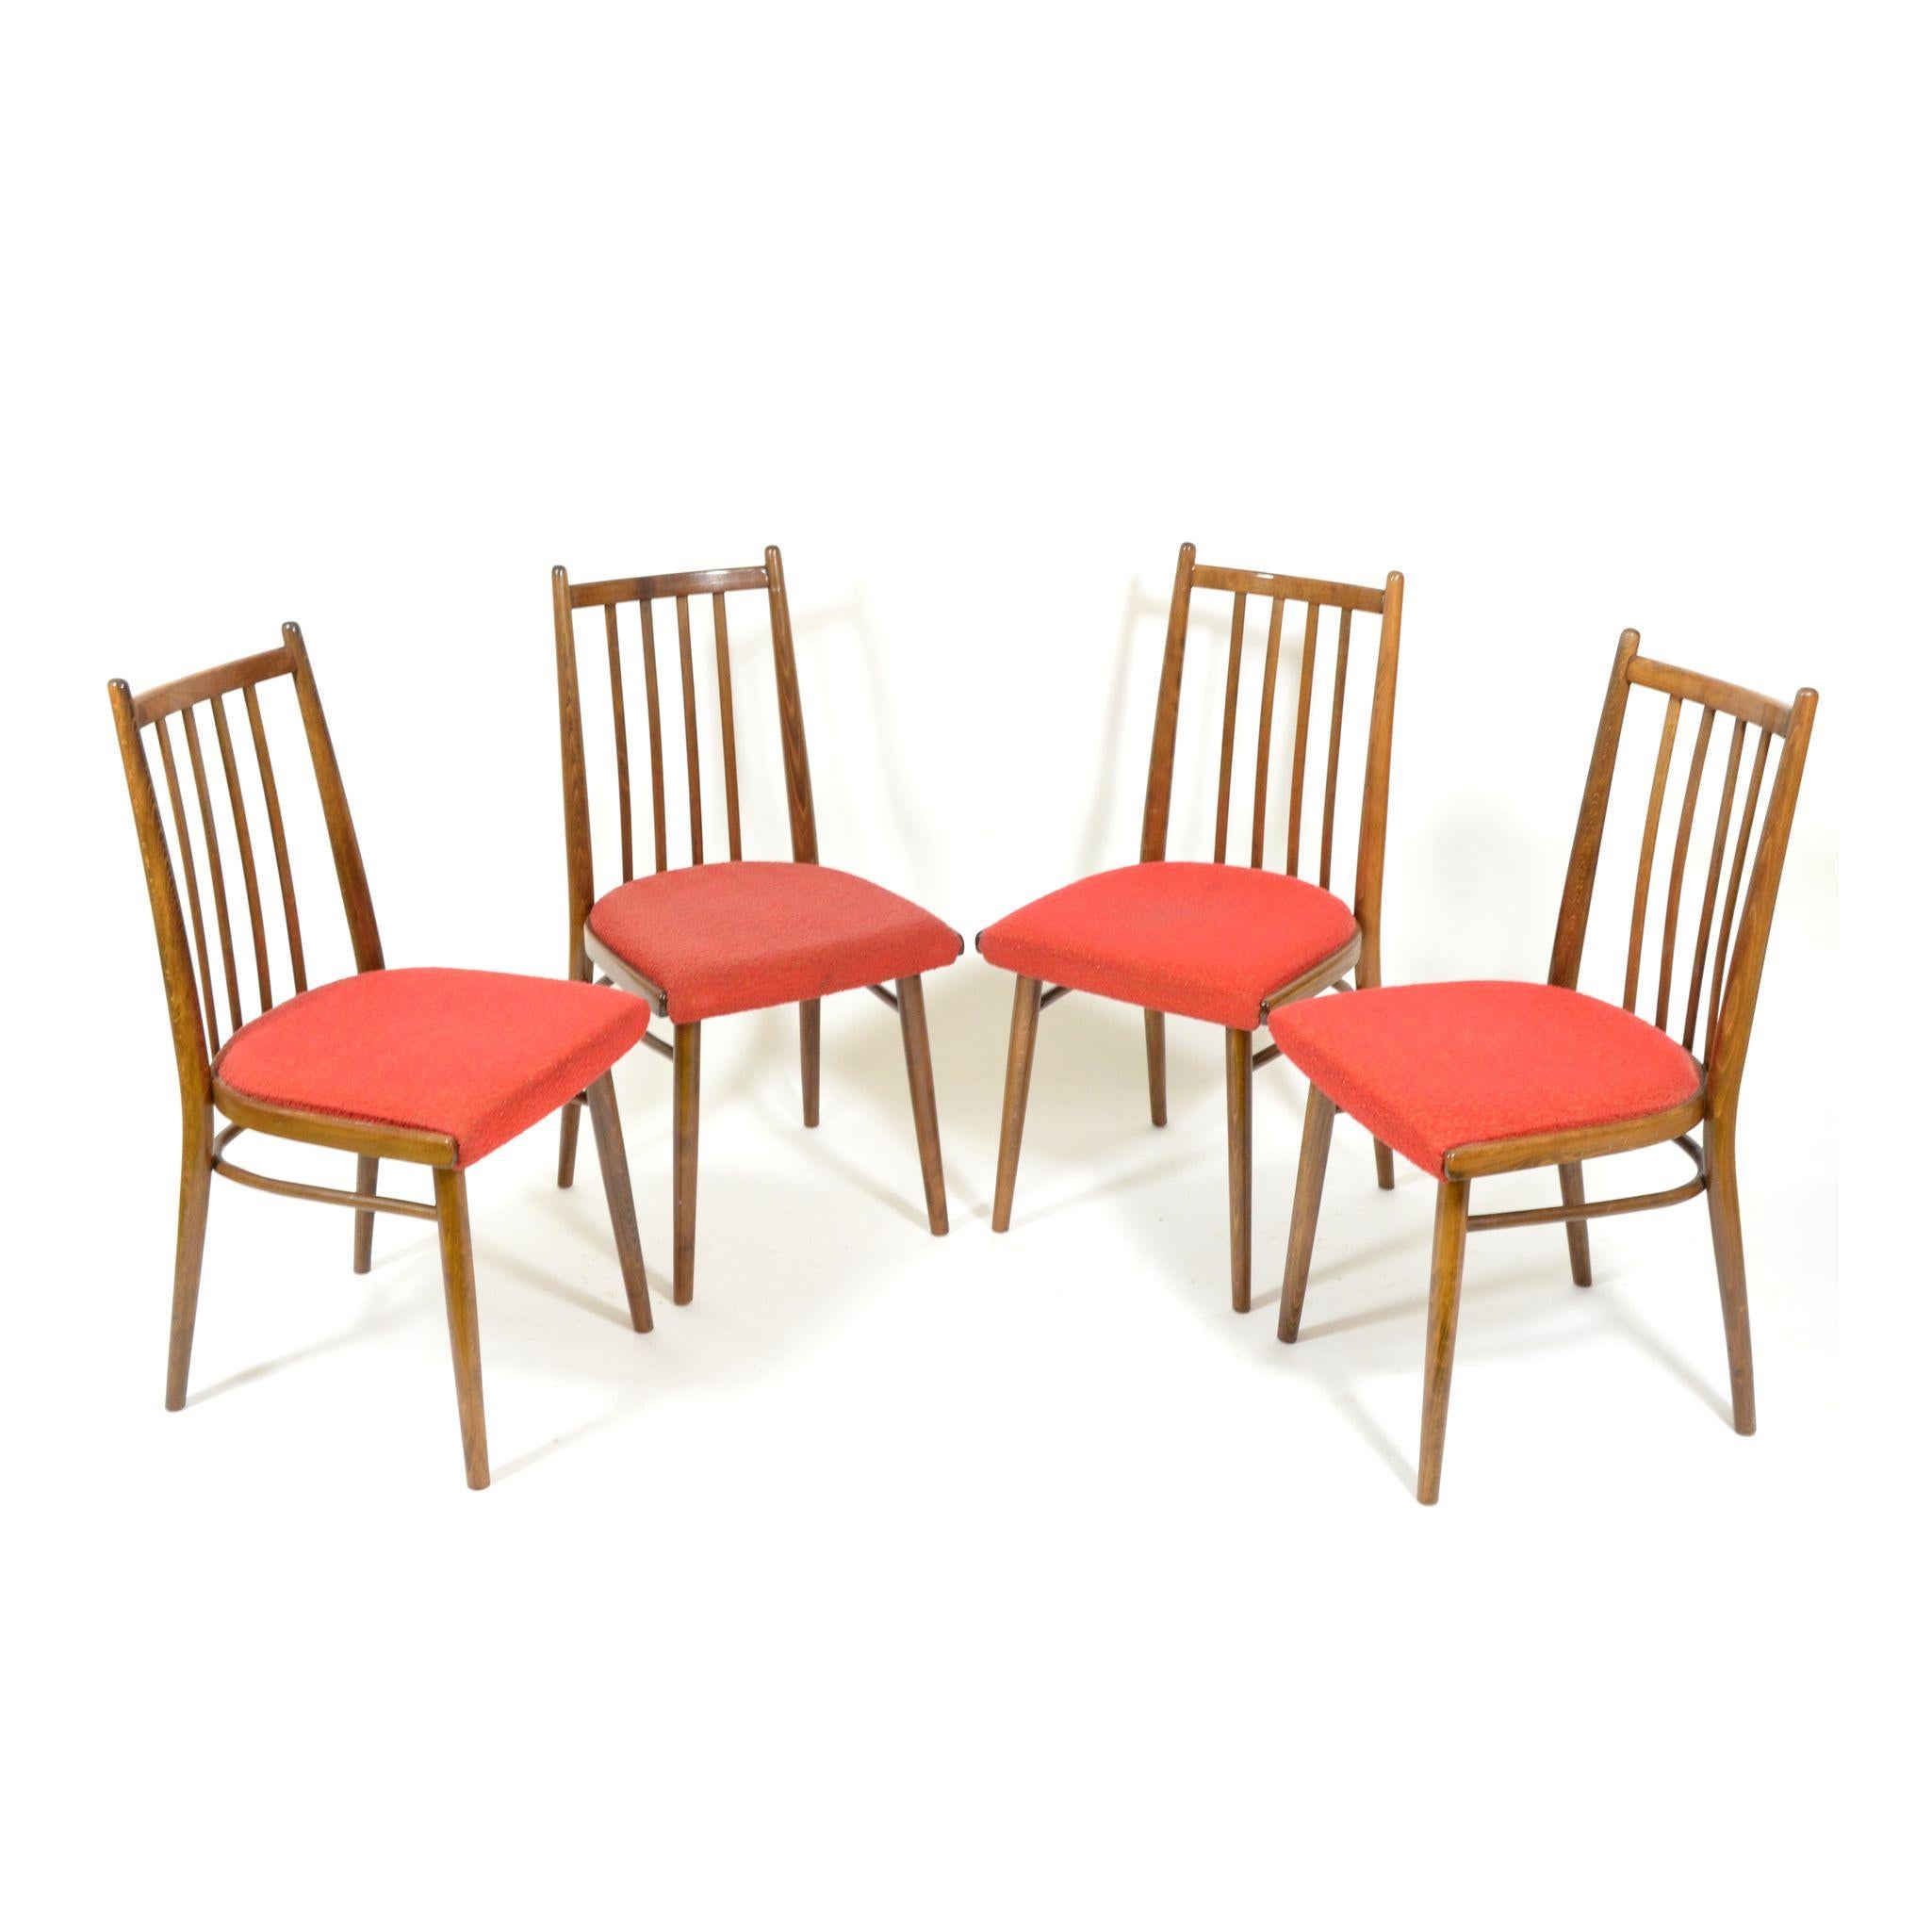 Set of four beech dining chairs in original, very good, condition. Chairs are stabile and can be used immediately. Wood very nice, with small signs of use. Red upholstery is also in good condition. Made in Czechoslovakia during 1970s.